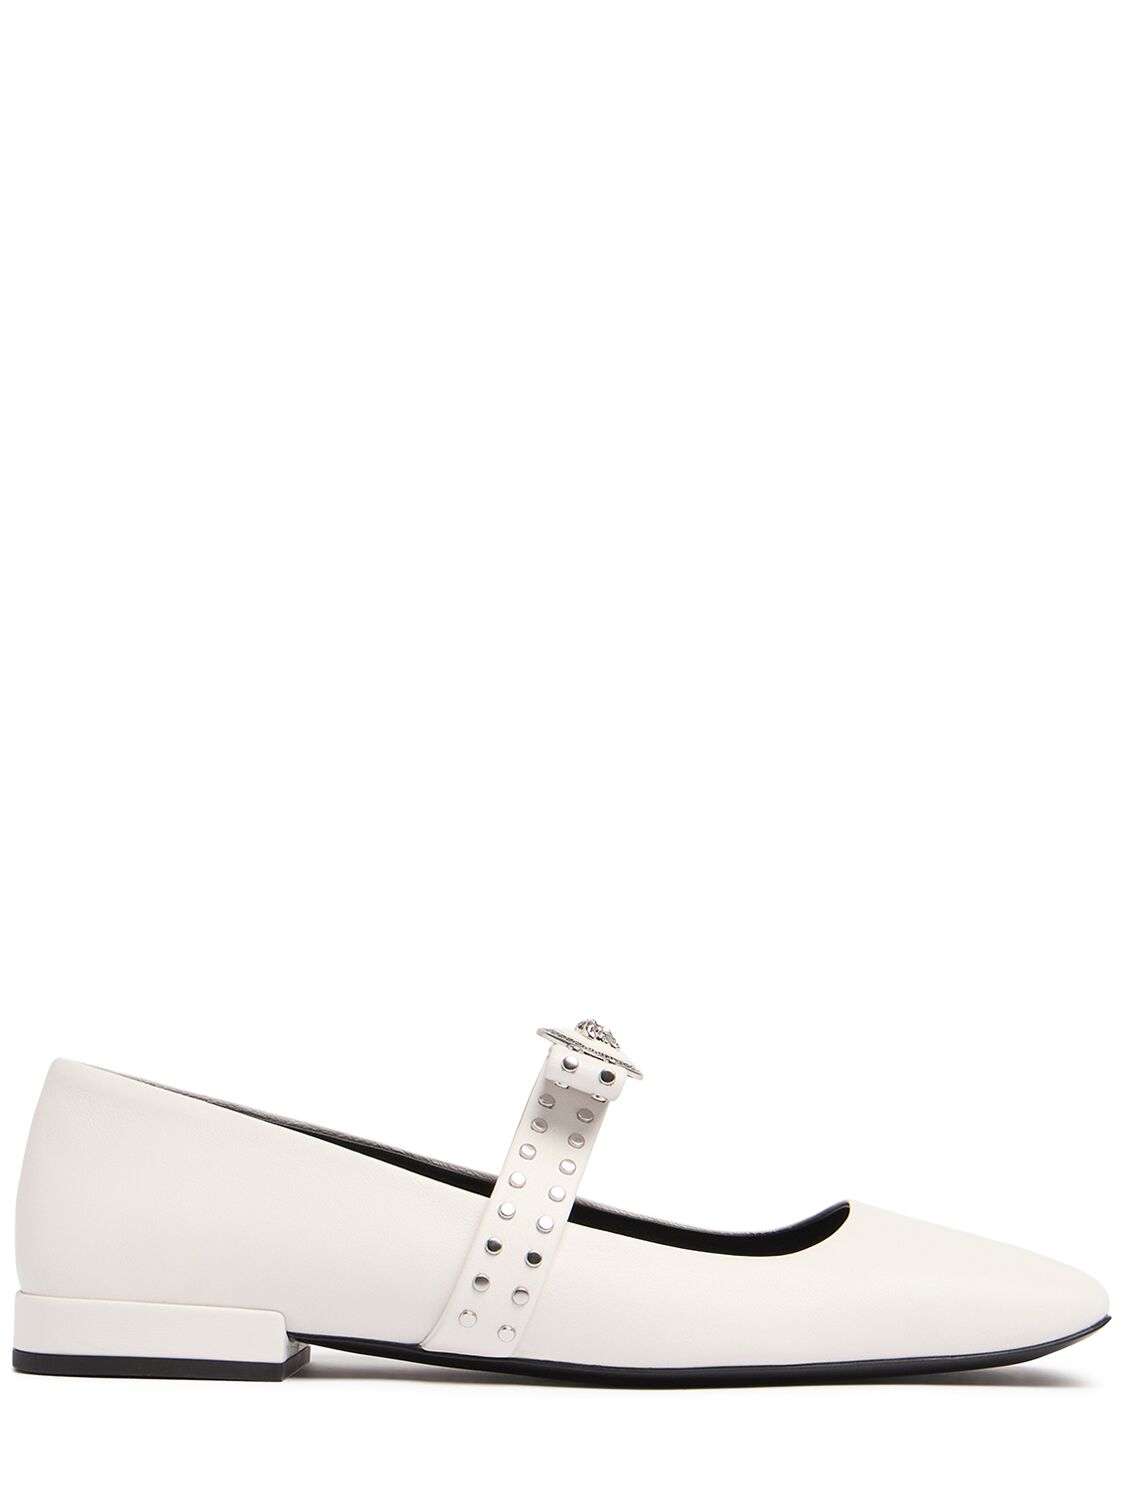 Versace 20mm Leather Ballerina Flats In White